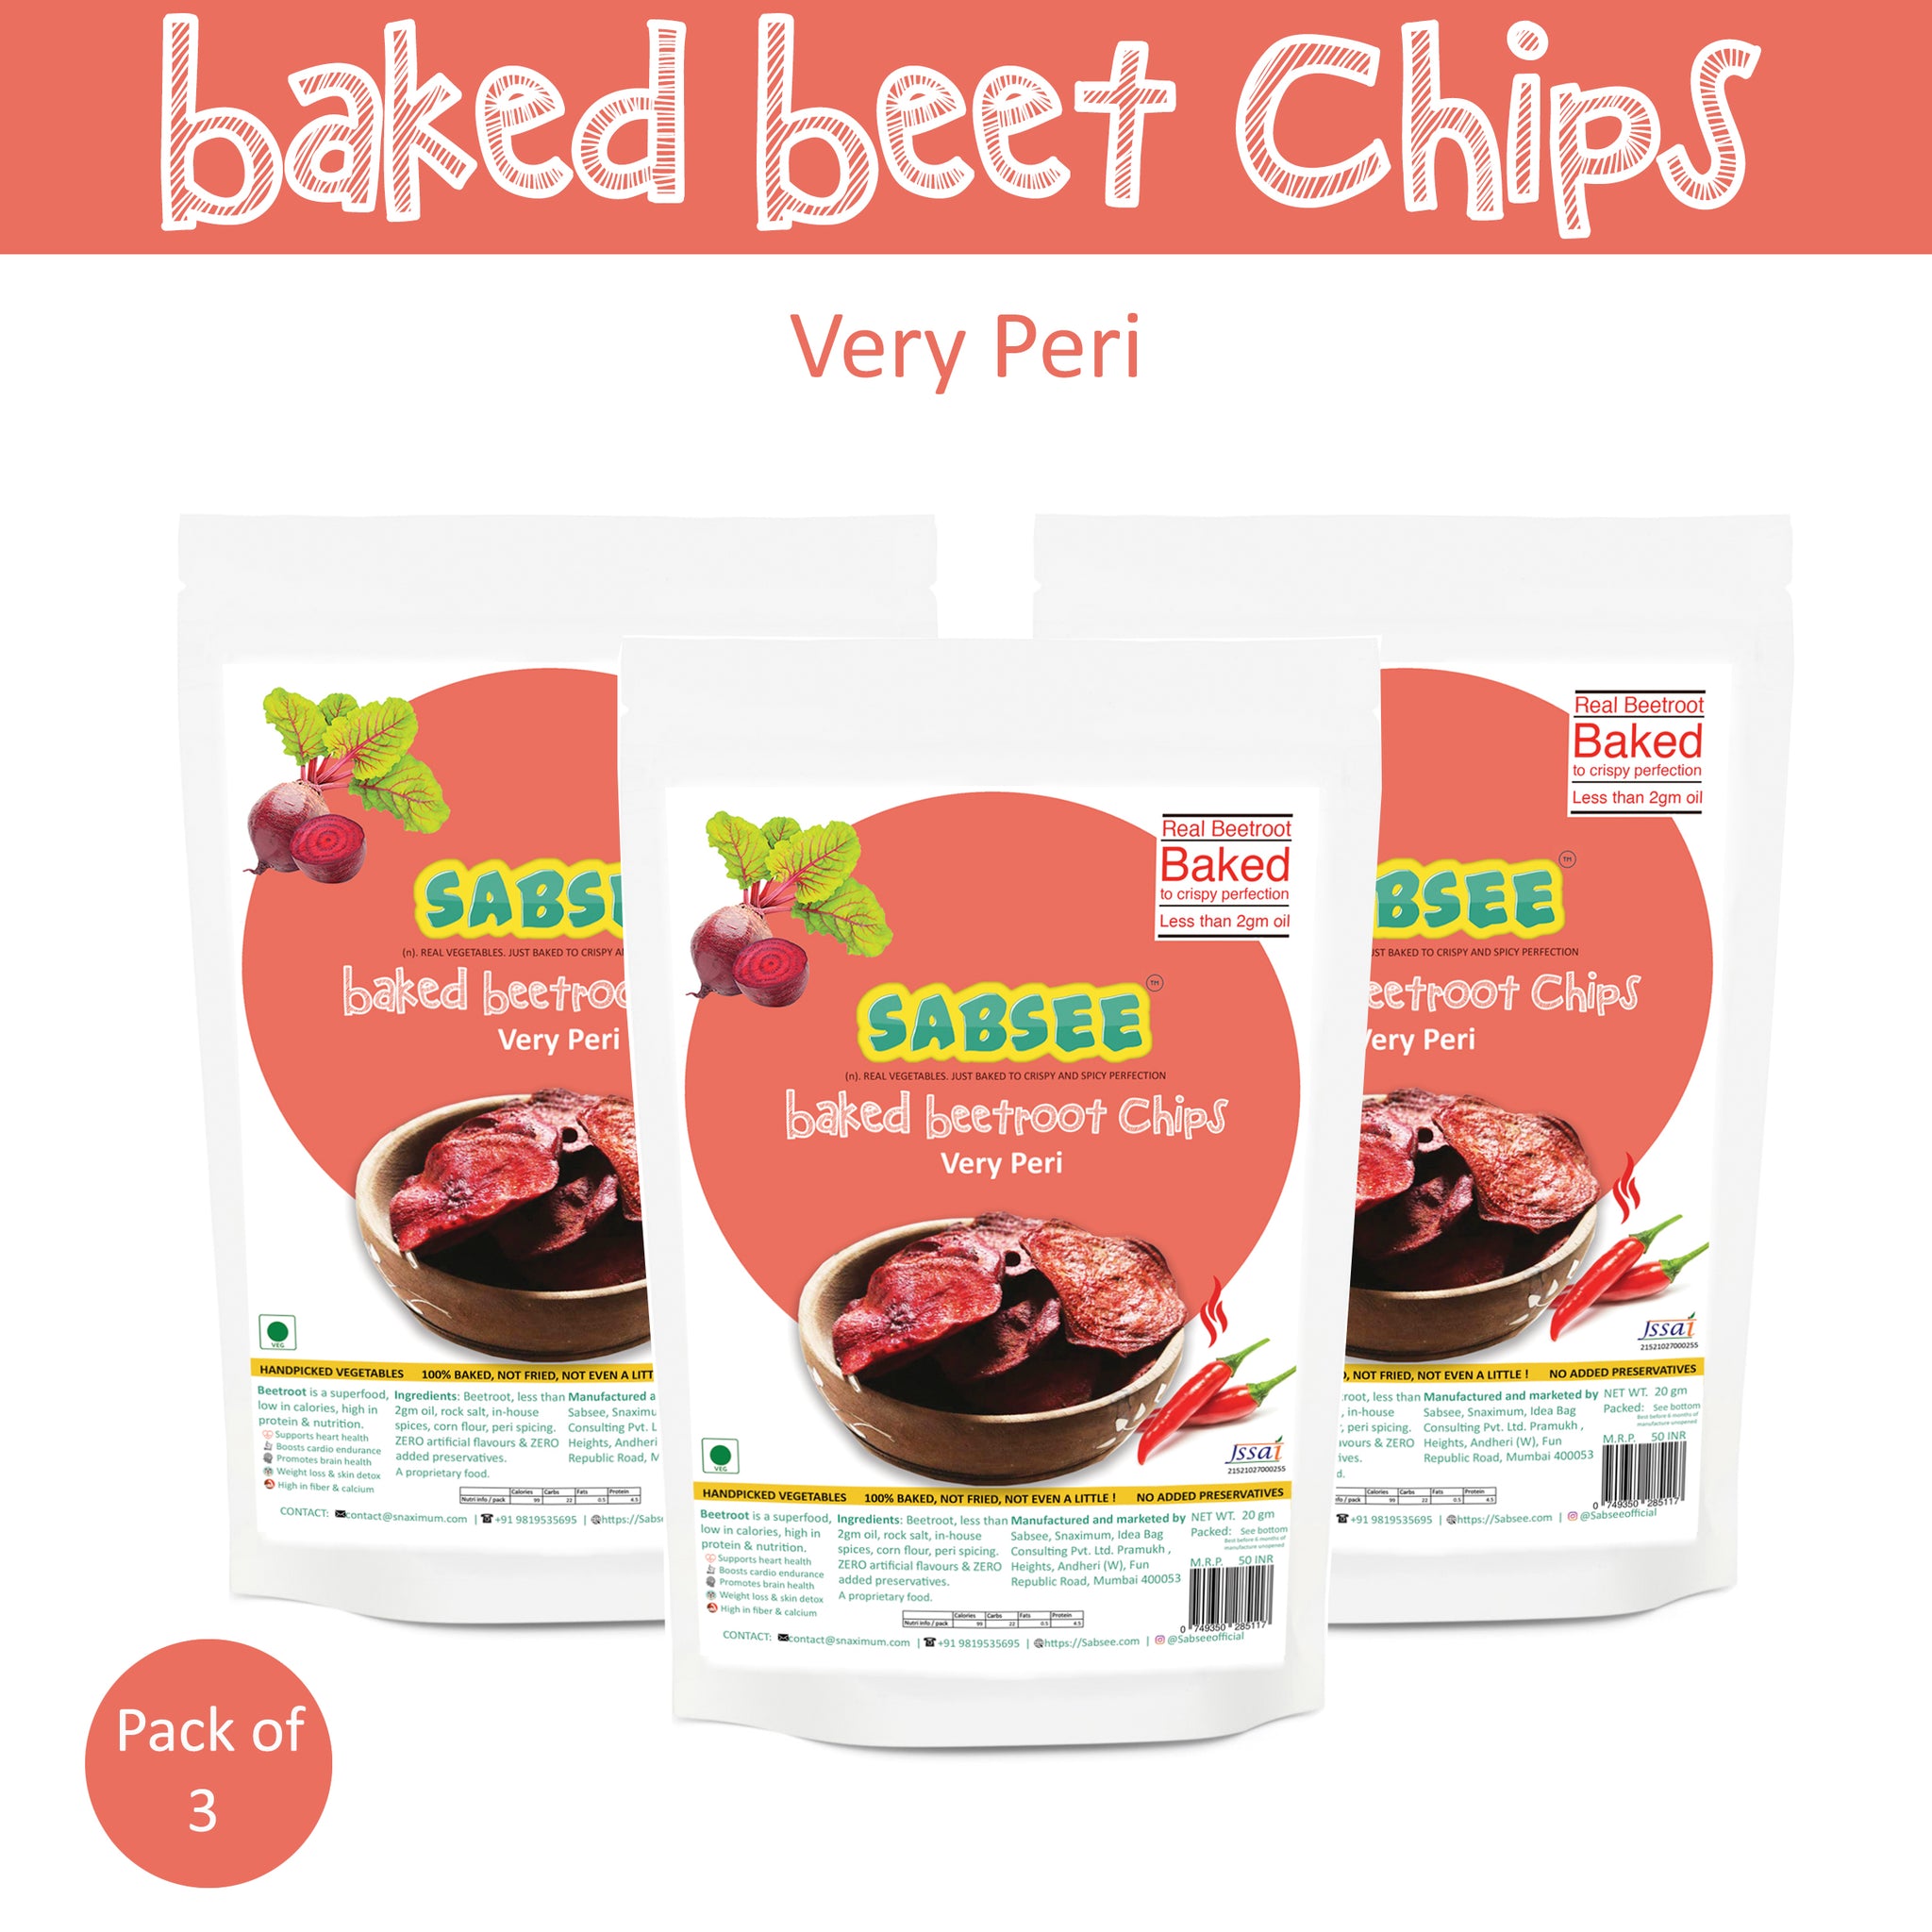 Oven Baked Beetroot Chips - Very Peri - ₹150 (3 Pack)